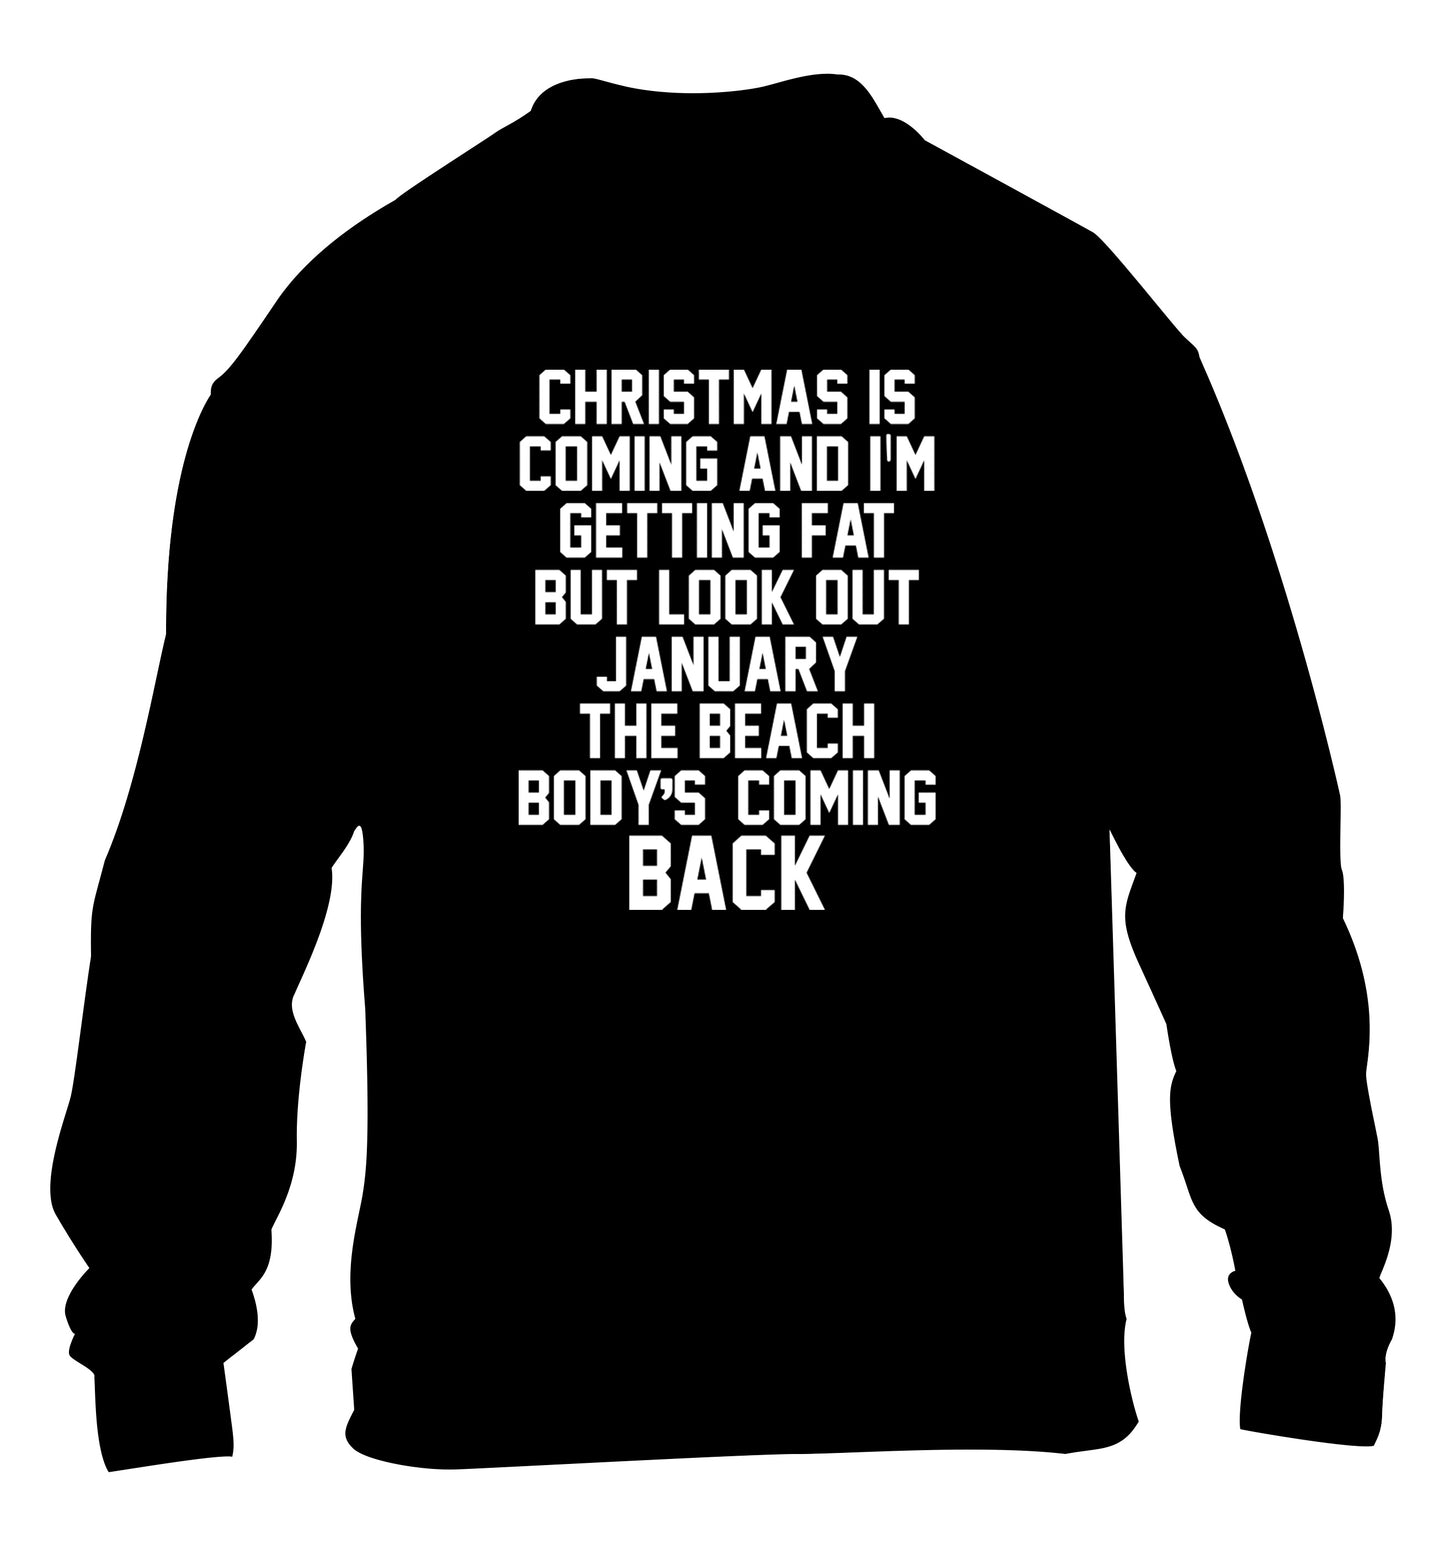 Christmas is coming and I'm getting fat but look out January the beach body's coming back! children's black sweater 12-14 Years